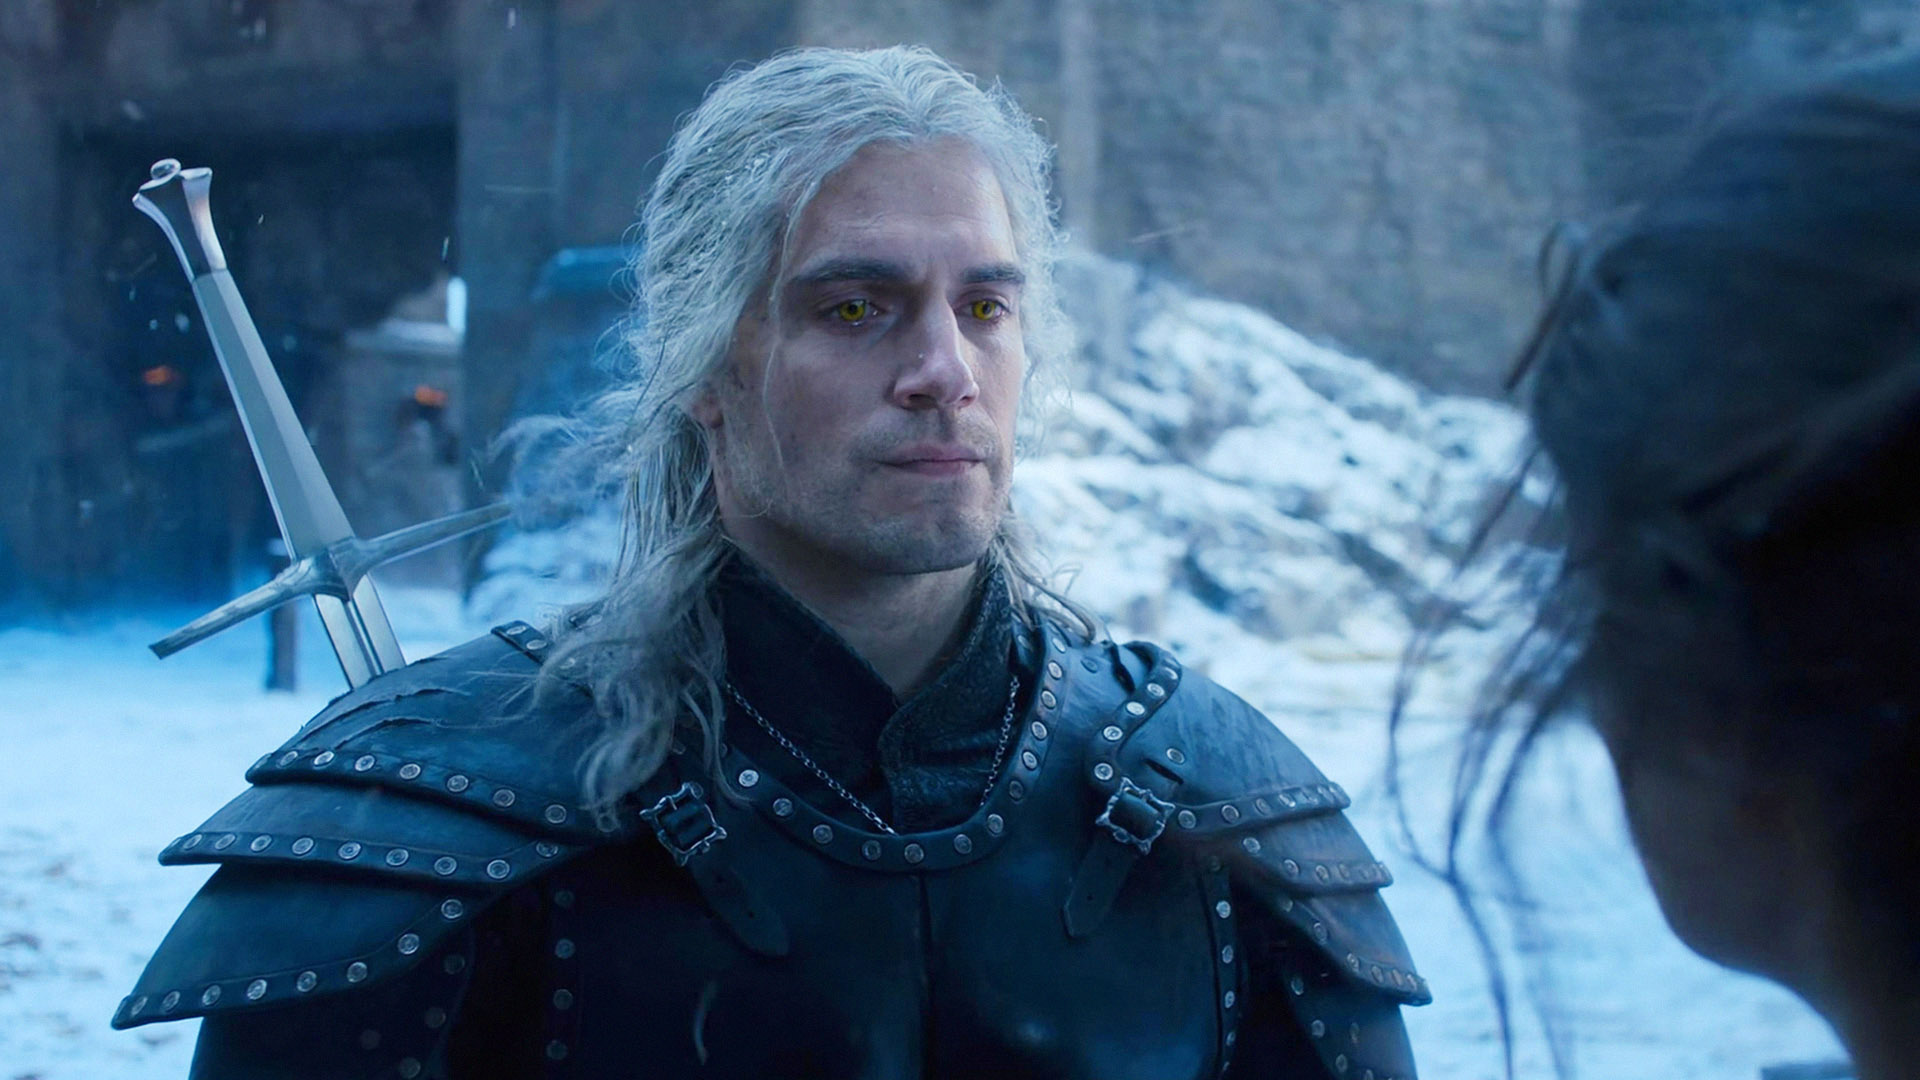 The Witcher' Season 3: News and Updates